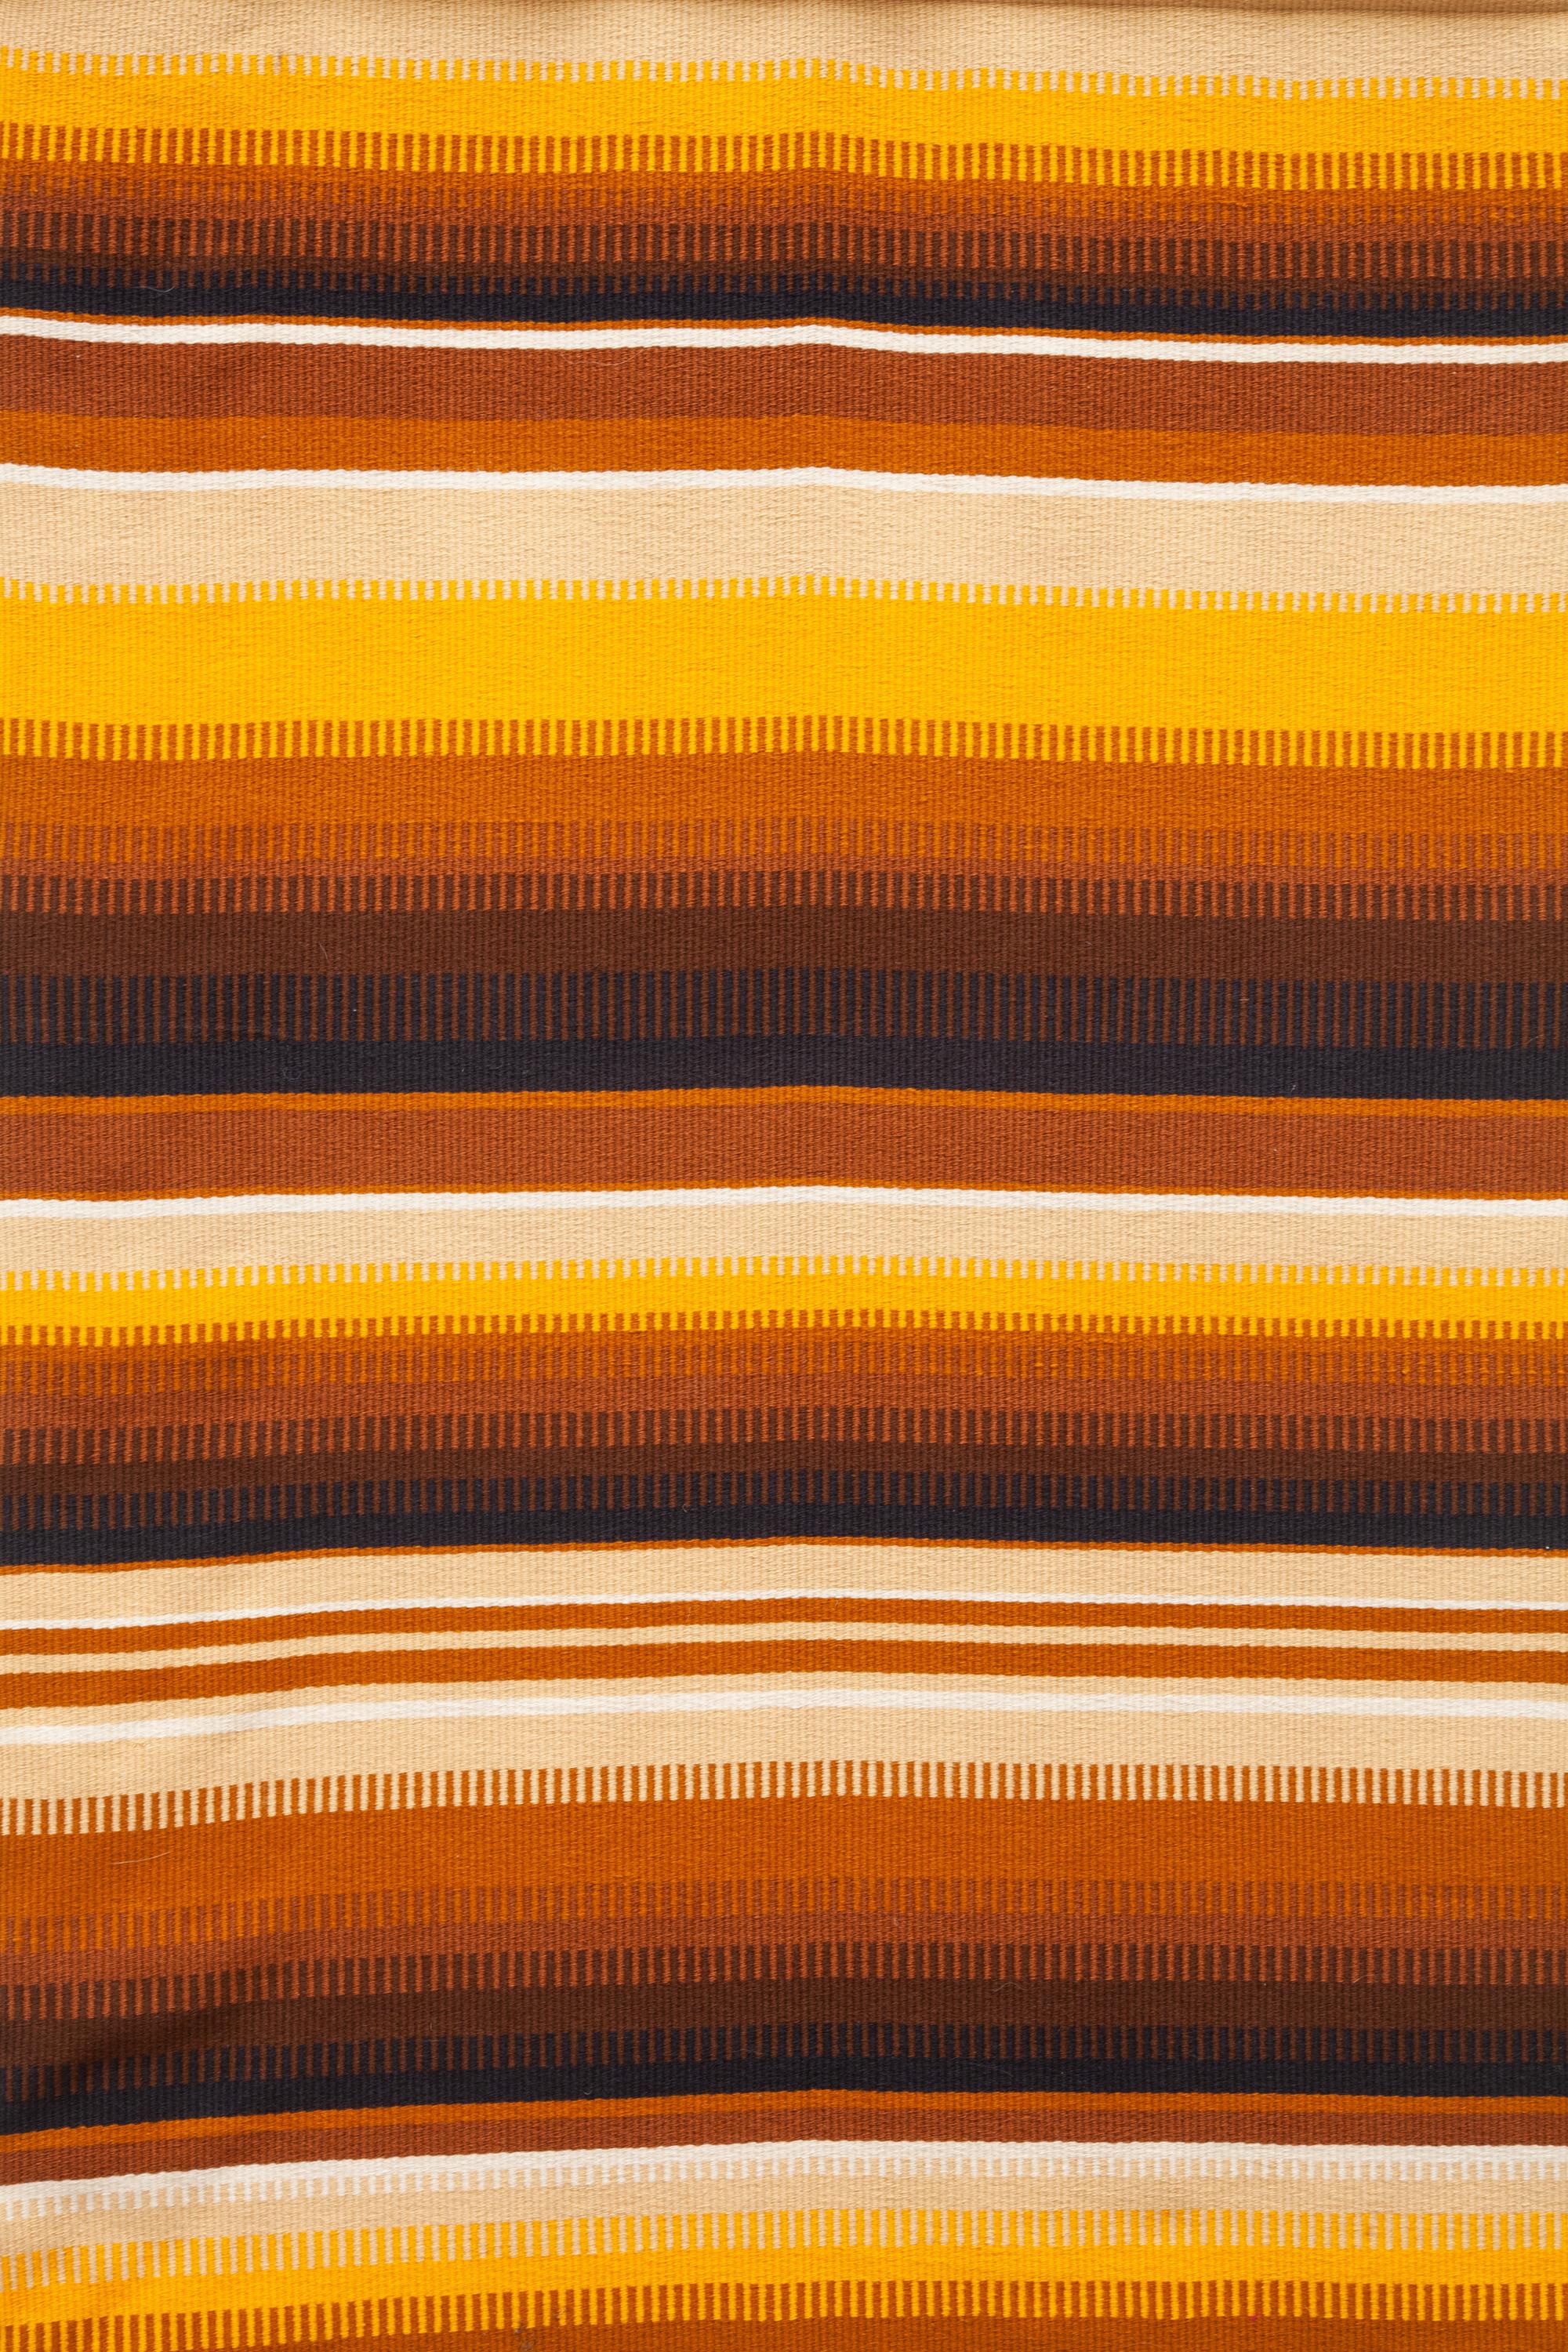 Sweden designed 1950s wool woven wall hanging tapestry.
Vintage wool tapestry featuring an ombré stripe in black, brown, yellow and cream.
Very good condition.
 